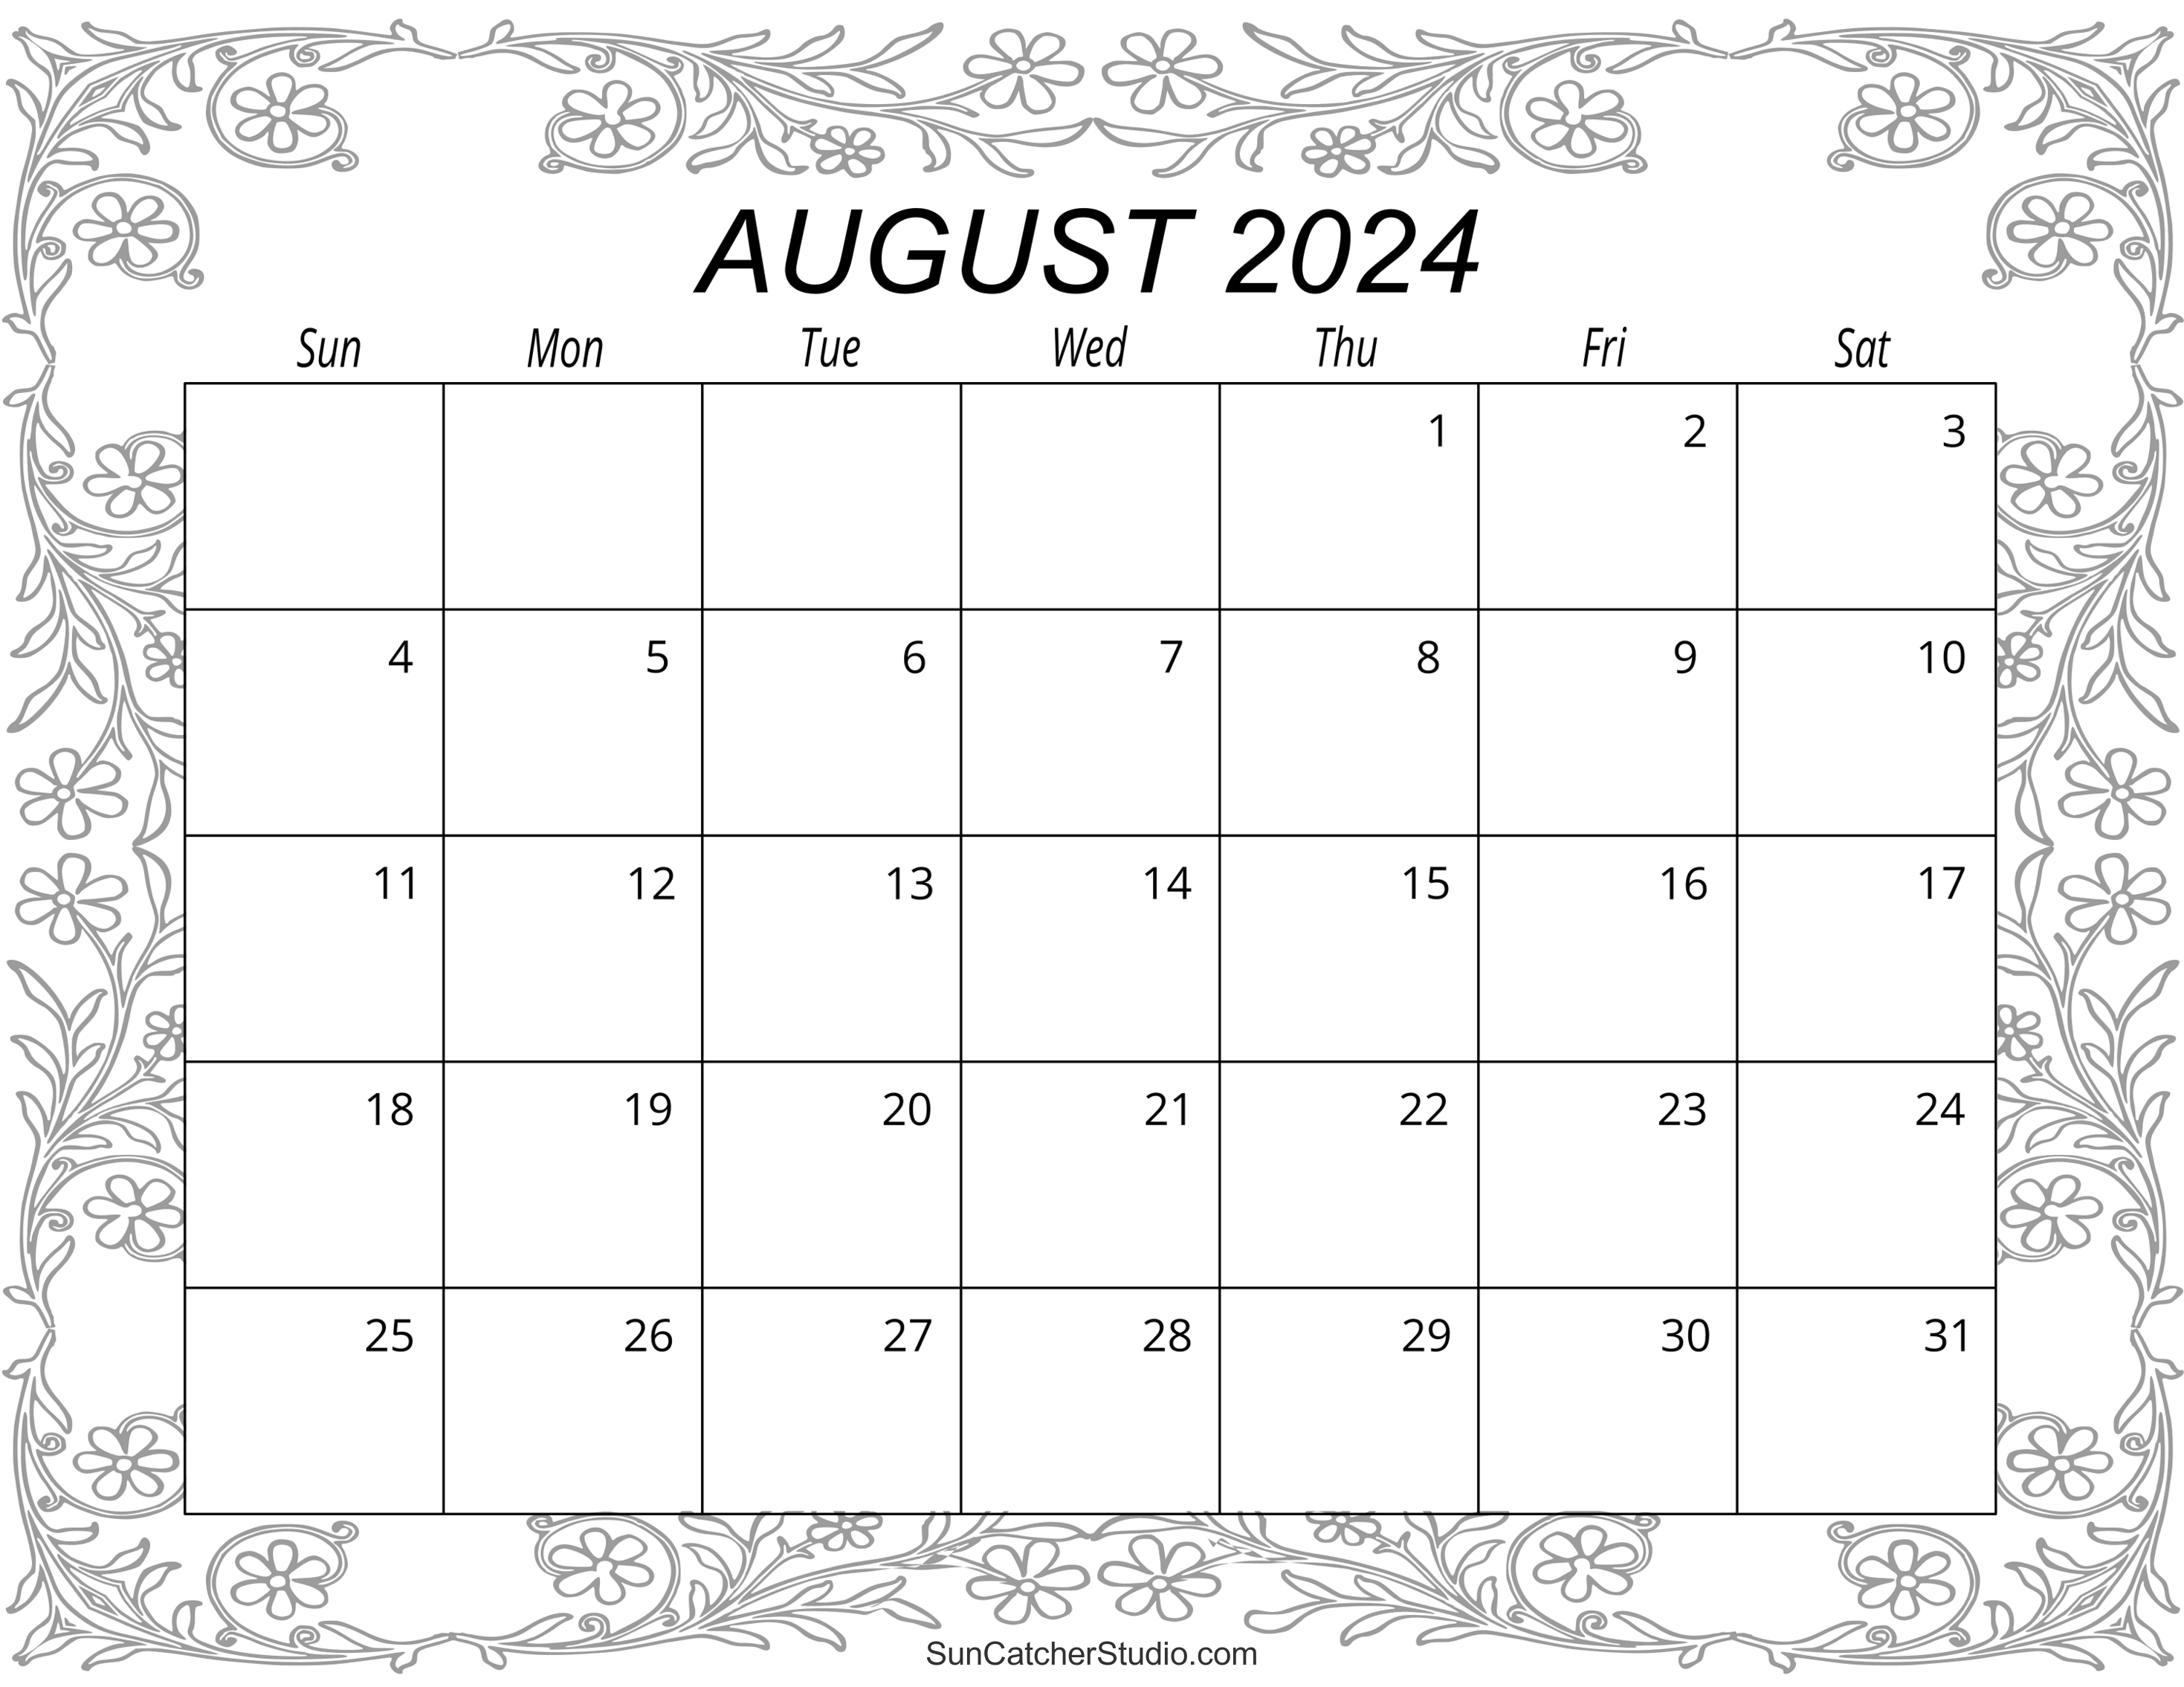 August 2024 Calendar (Free Printable) – Diy Projects, Patterns in Free Printable Black And White Calendar Aug 2024